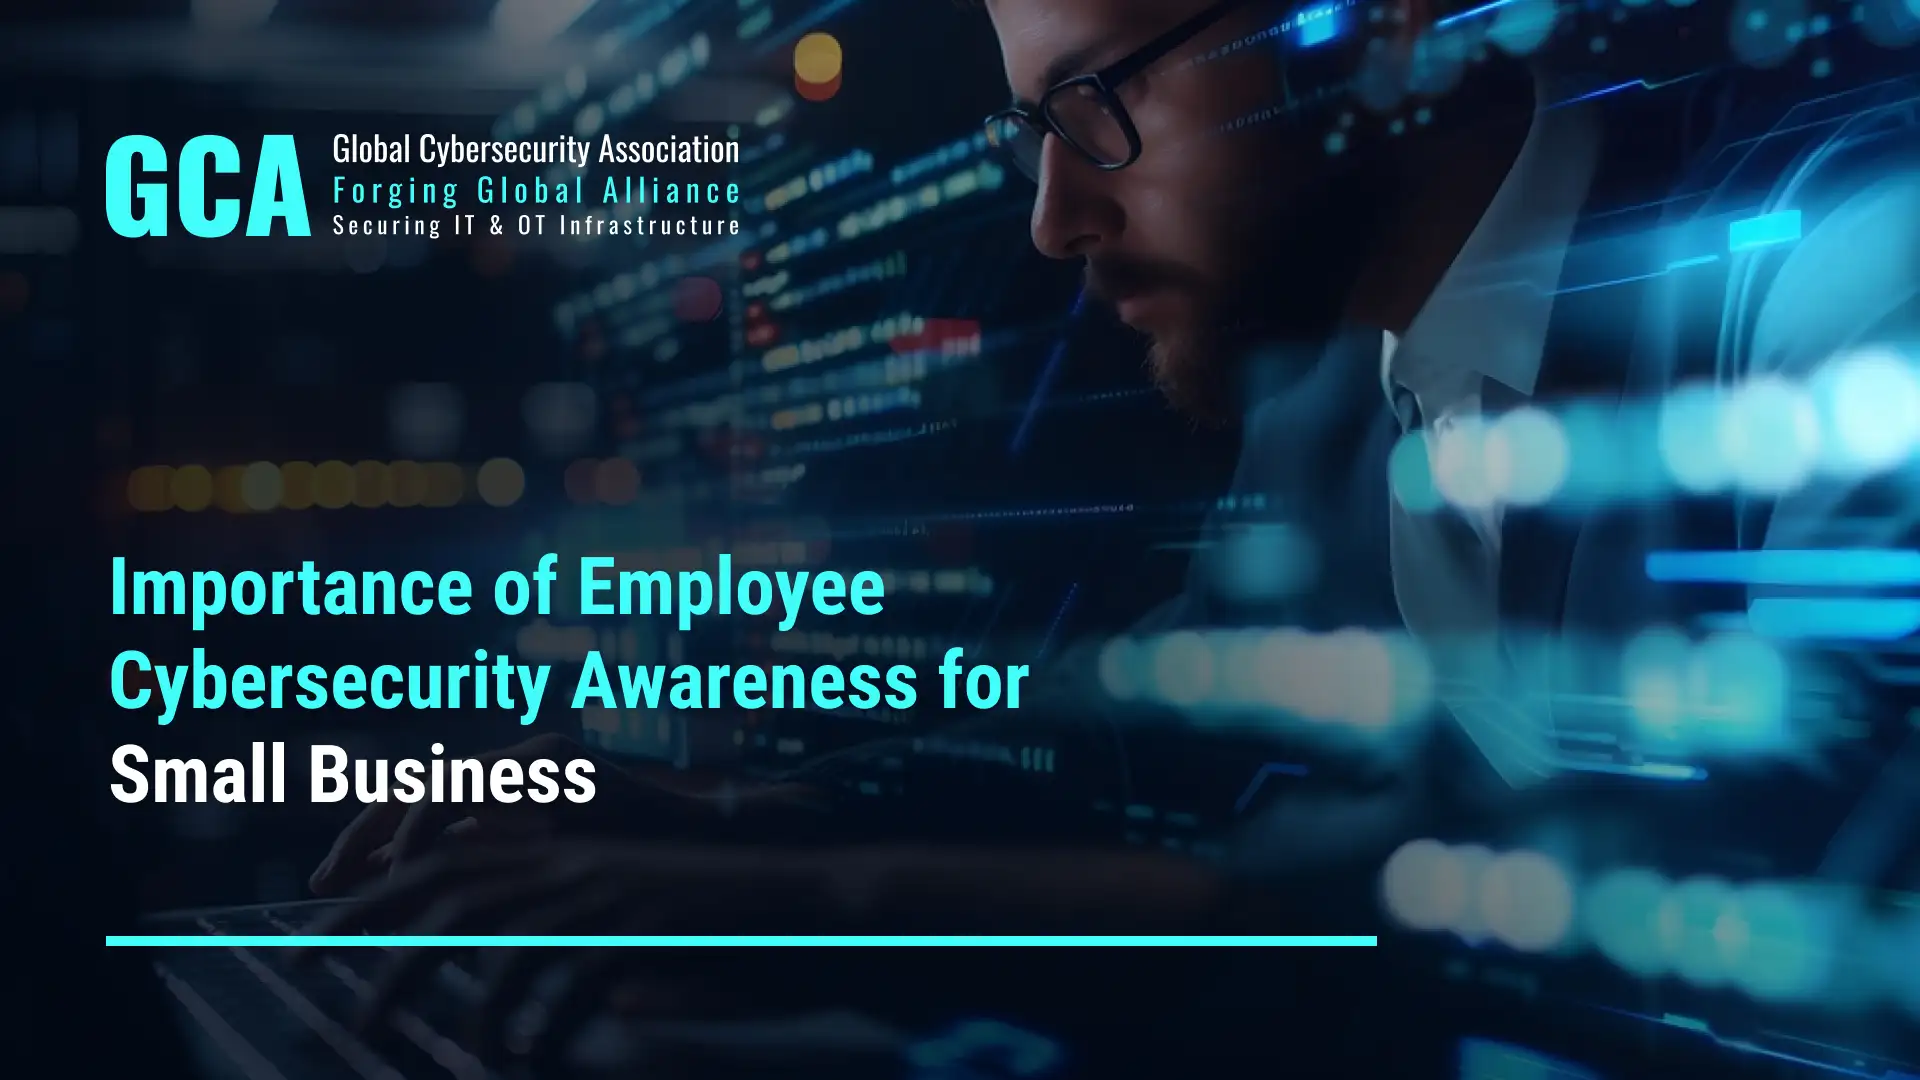 Importance of Employee Cybersecurity Awareness for Small Business